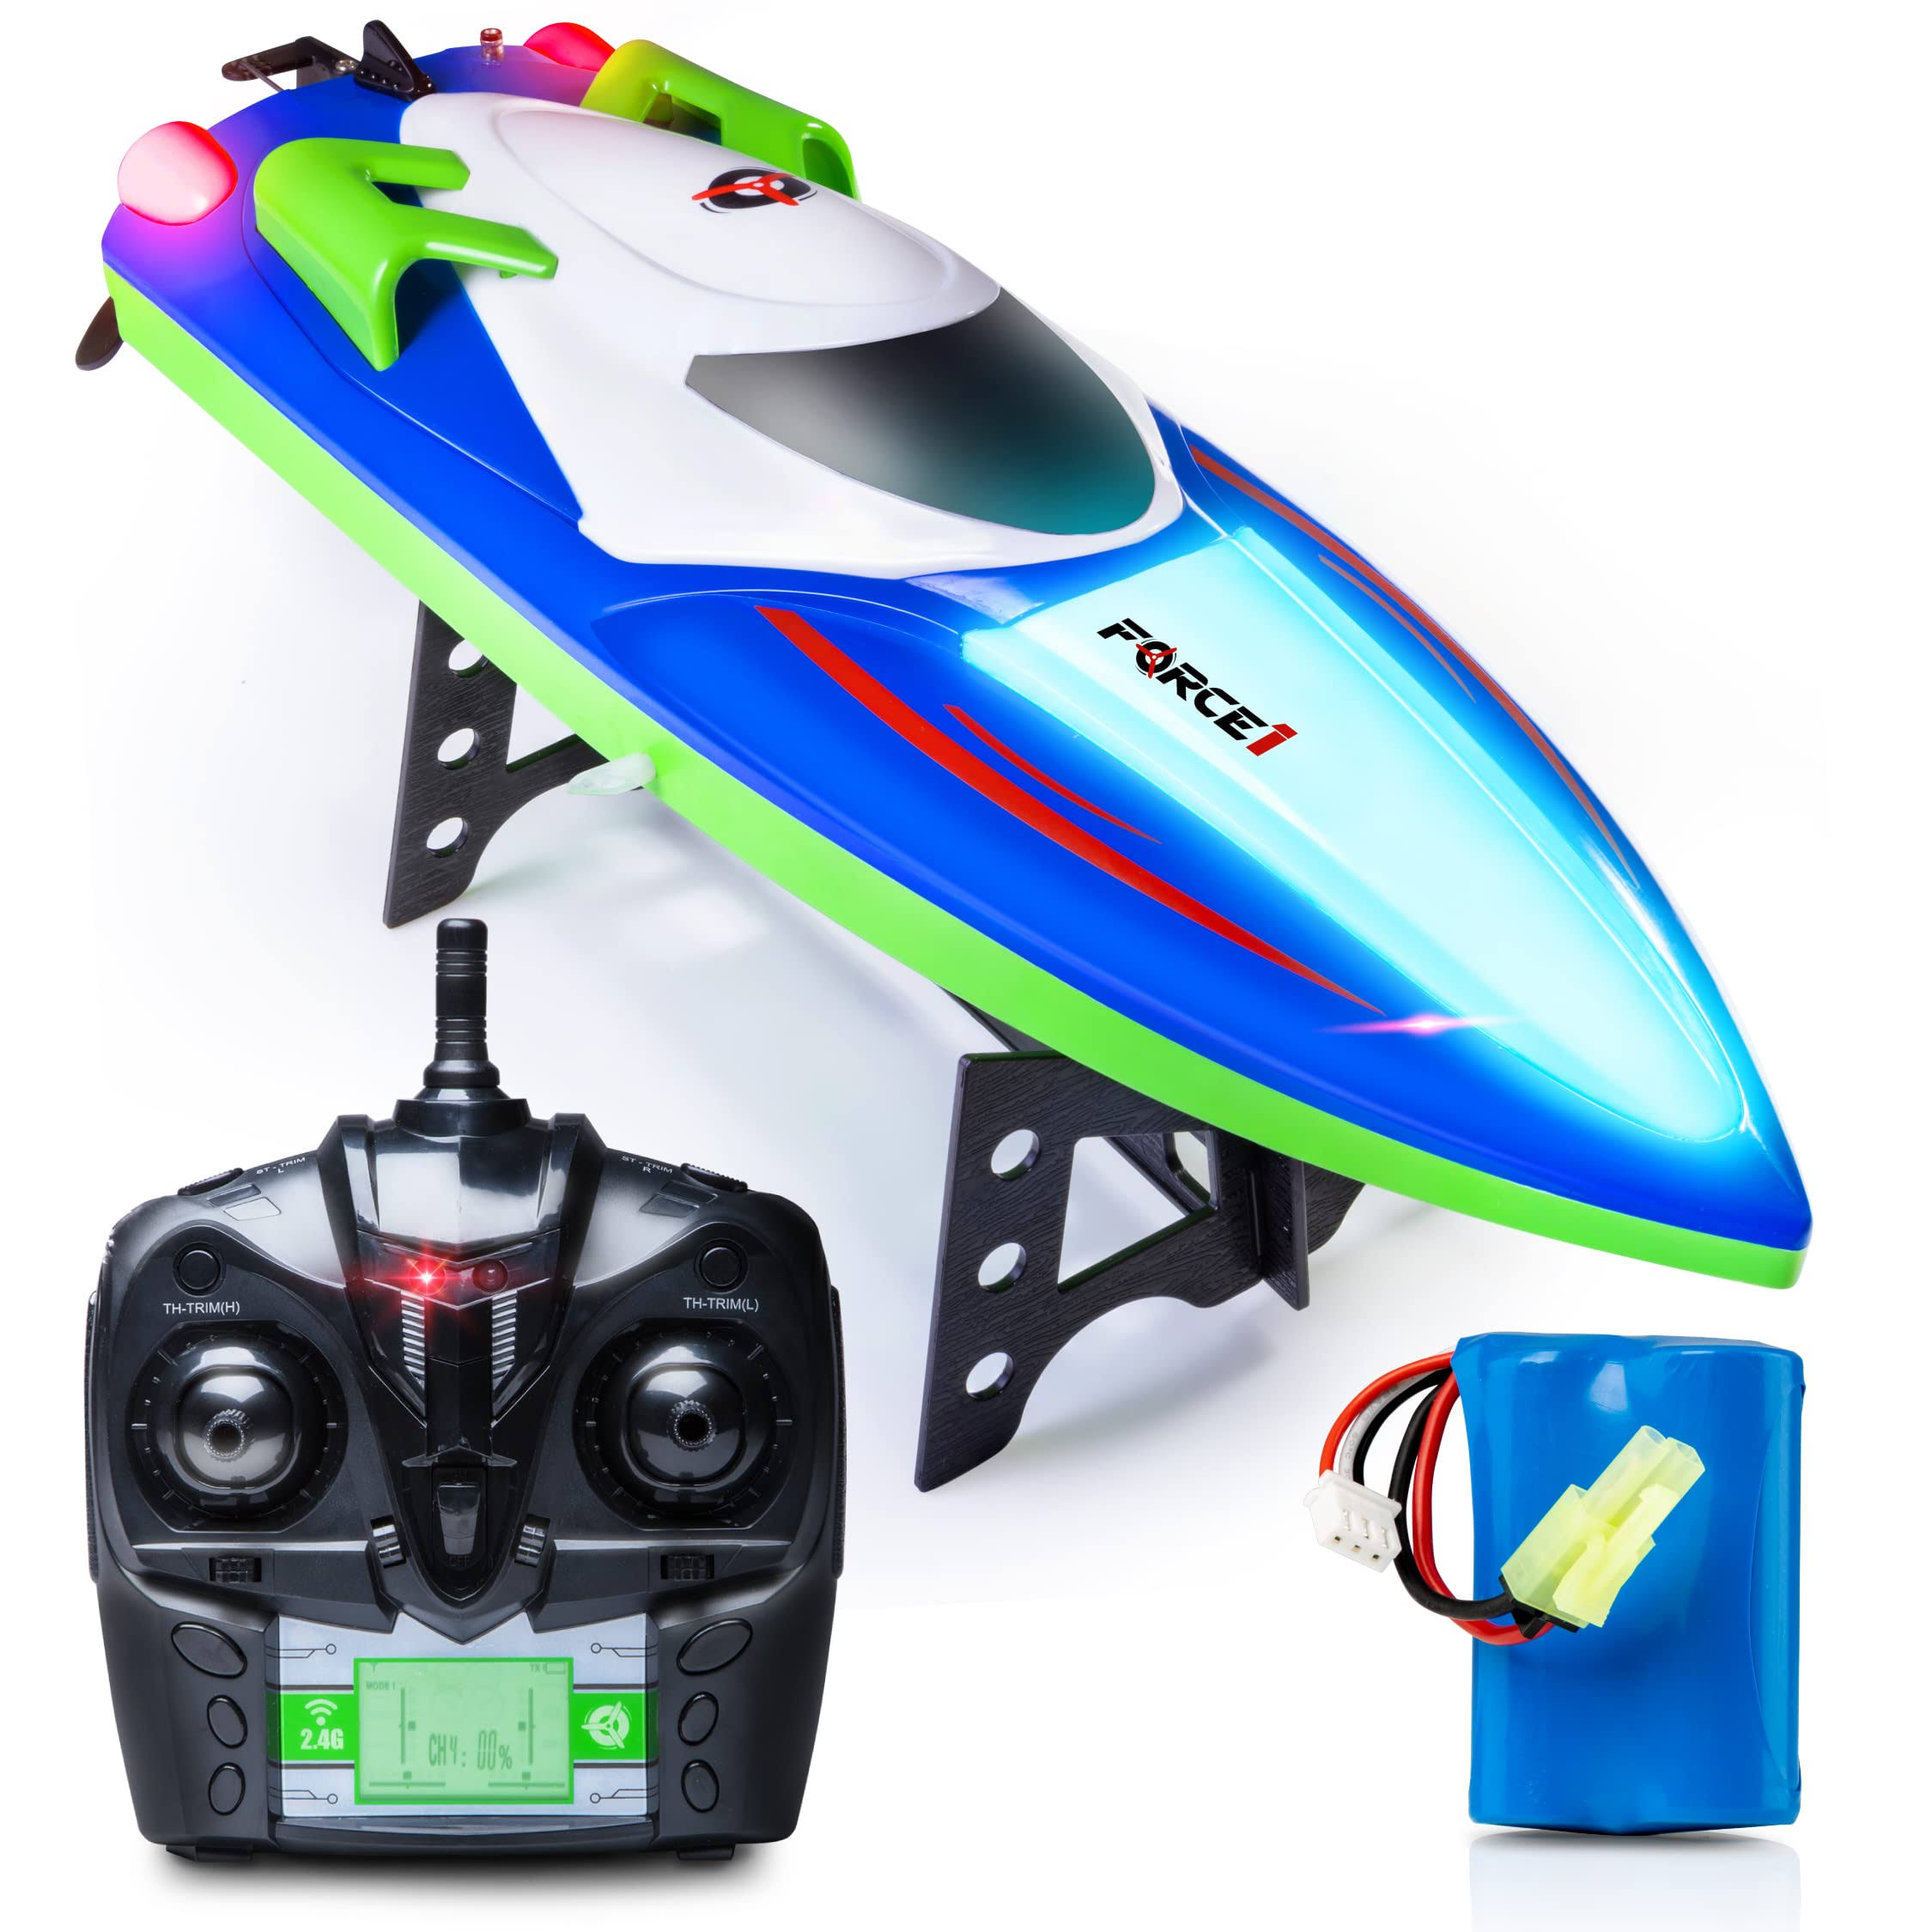 Force1 Velocity X H102 LED RC Boat - Remote Control Boat for Pools or Lakes with Bright LED Lights, Fast RC Boat for Adults and Kids 20+ mph, 4